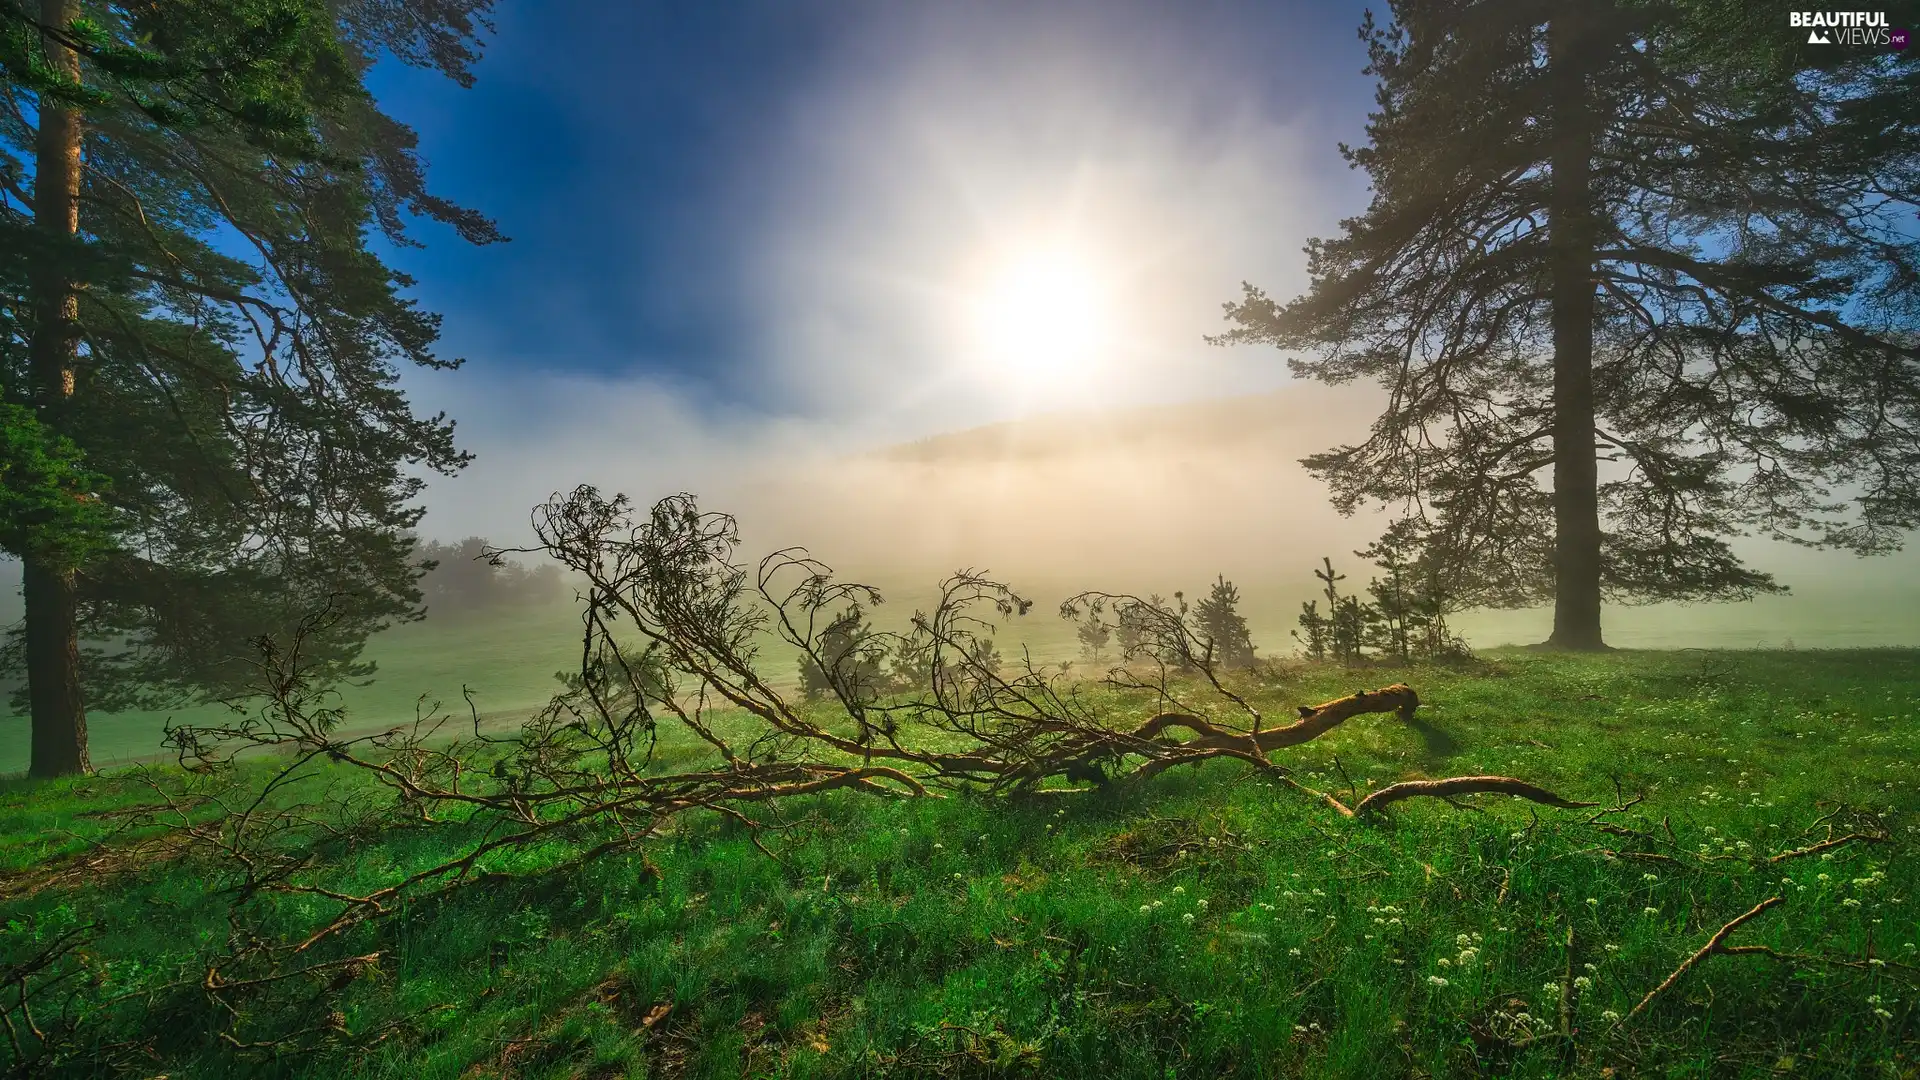 car in the meadow, trees, Fog, Sunrise, Lod on the beach, viewes